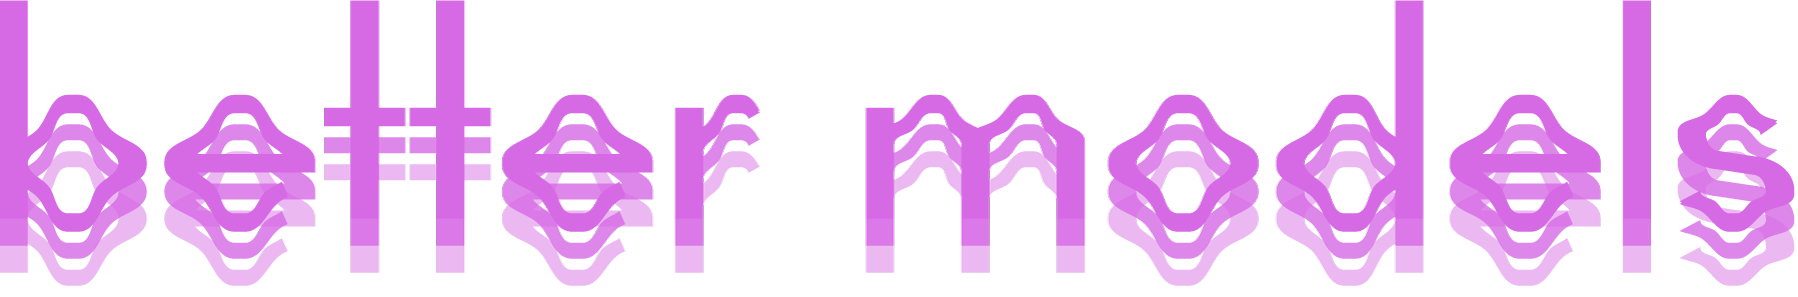 band logotype in stacked fuschia layers